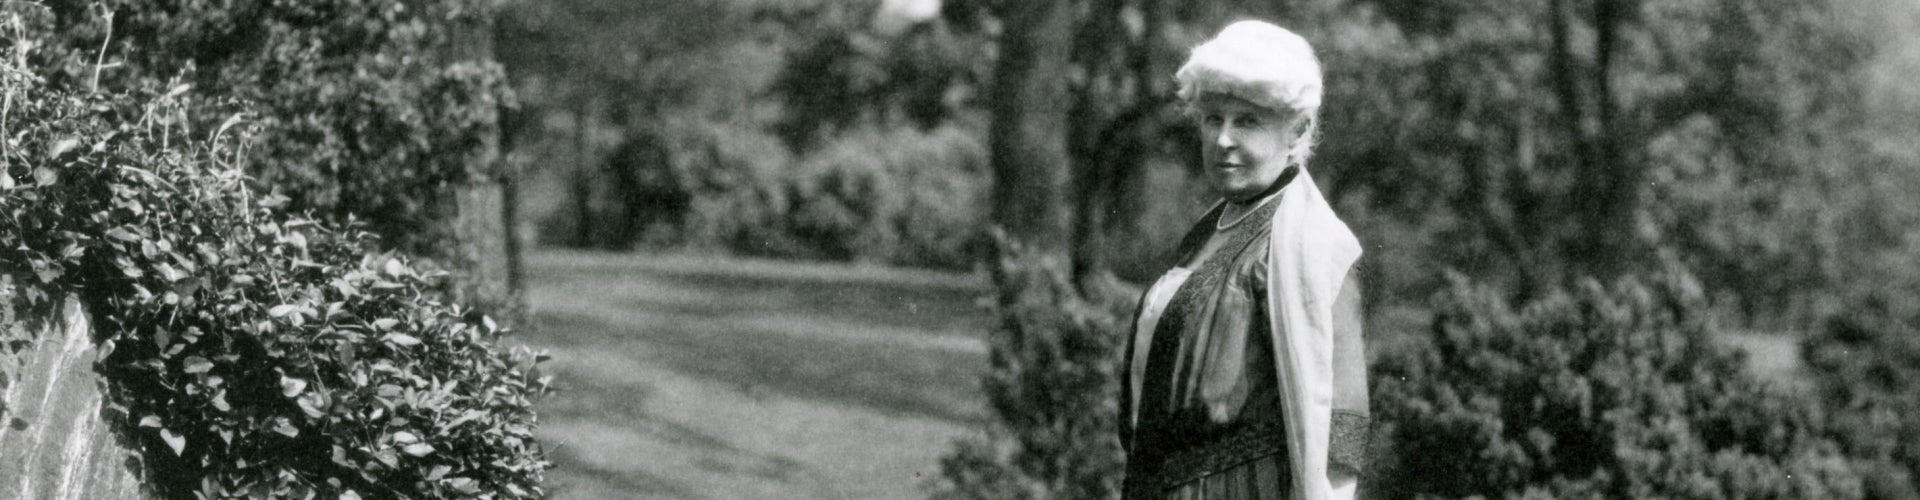 A black-and-white photograph of an woman standing in a garden.